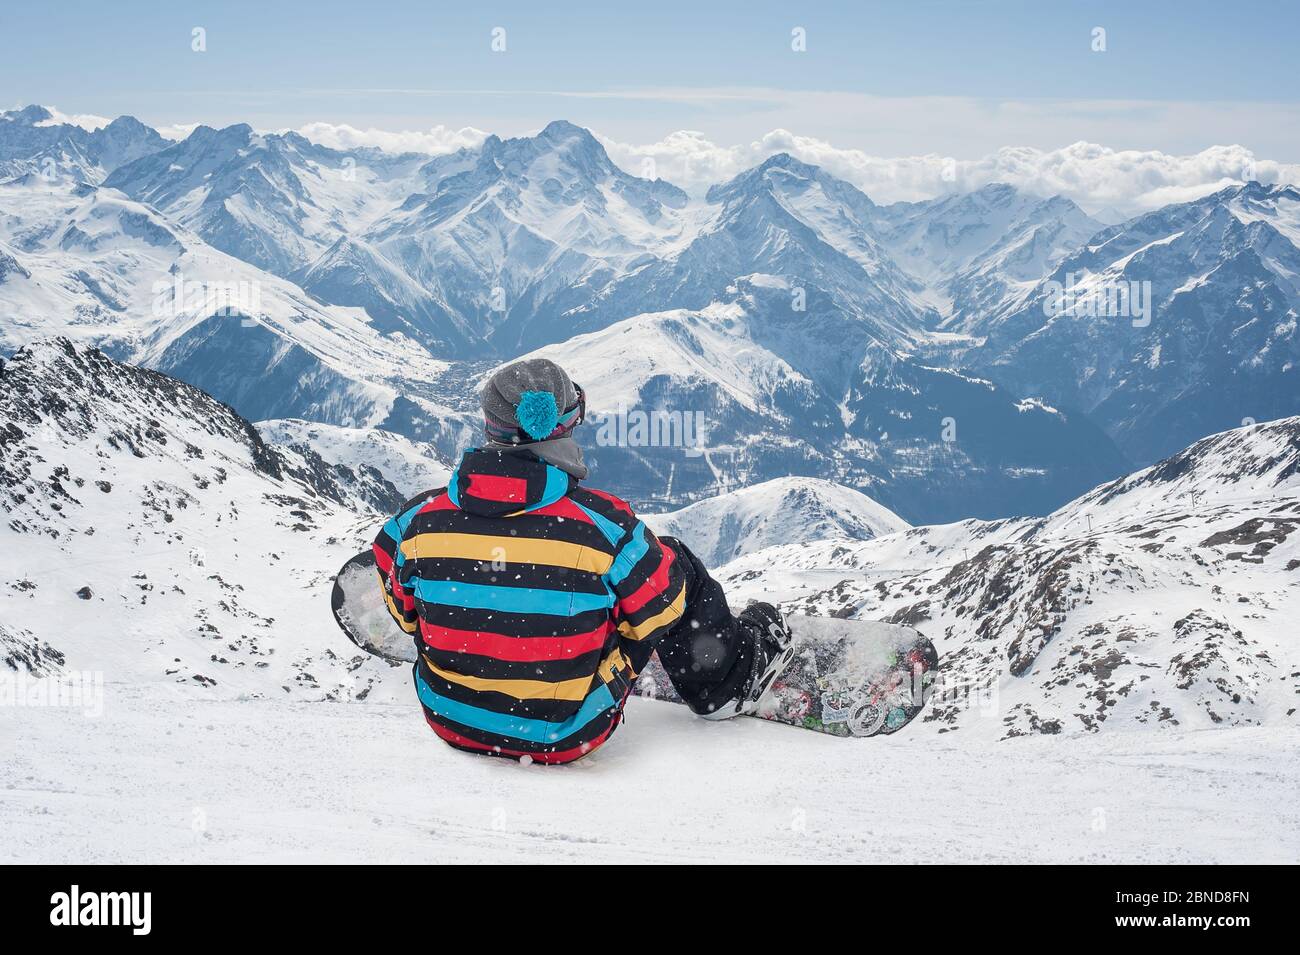 Snowboarder sitting on the fresh snow top of a mountain enjoying the scenery of a ski resort. Back view Stock Photo